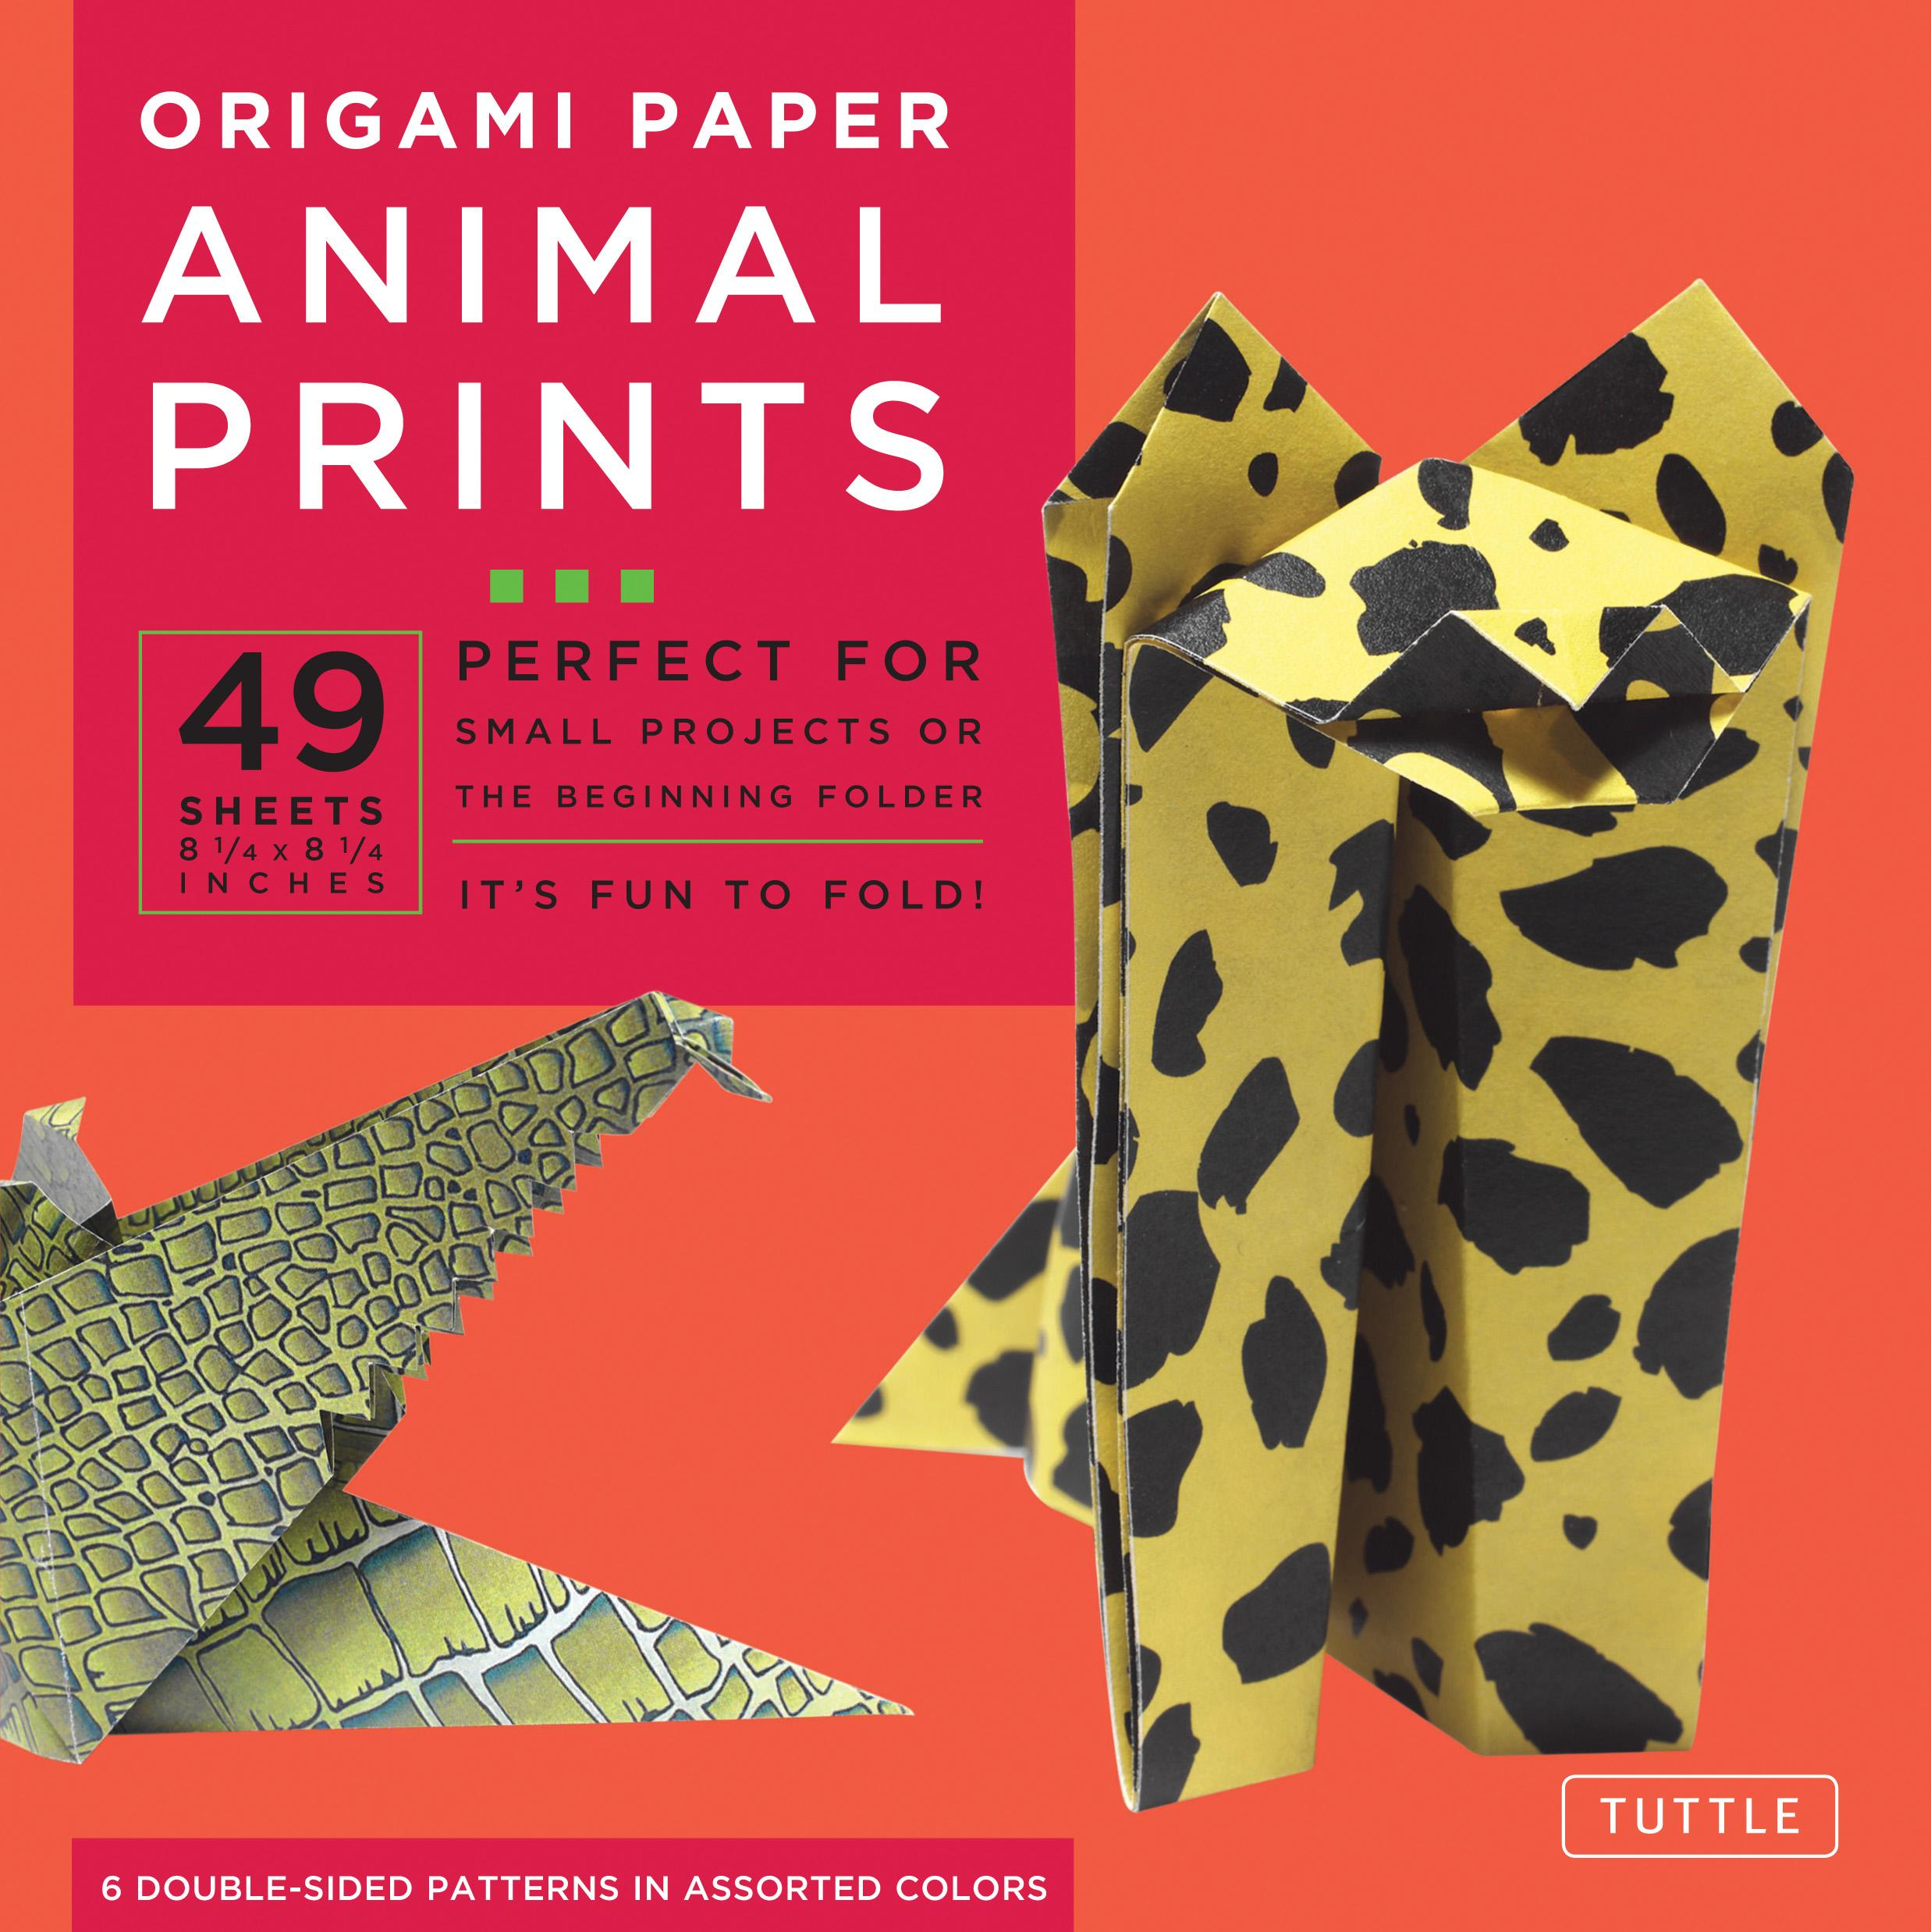 Large Origami Paper Origami Paper Animal Prints 8 14 49 Sheets Tuttle Origami Paper High Quality Large Origami Sheets Printed With 6 Different Patterns